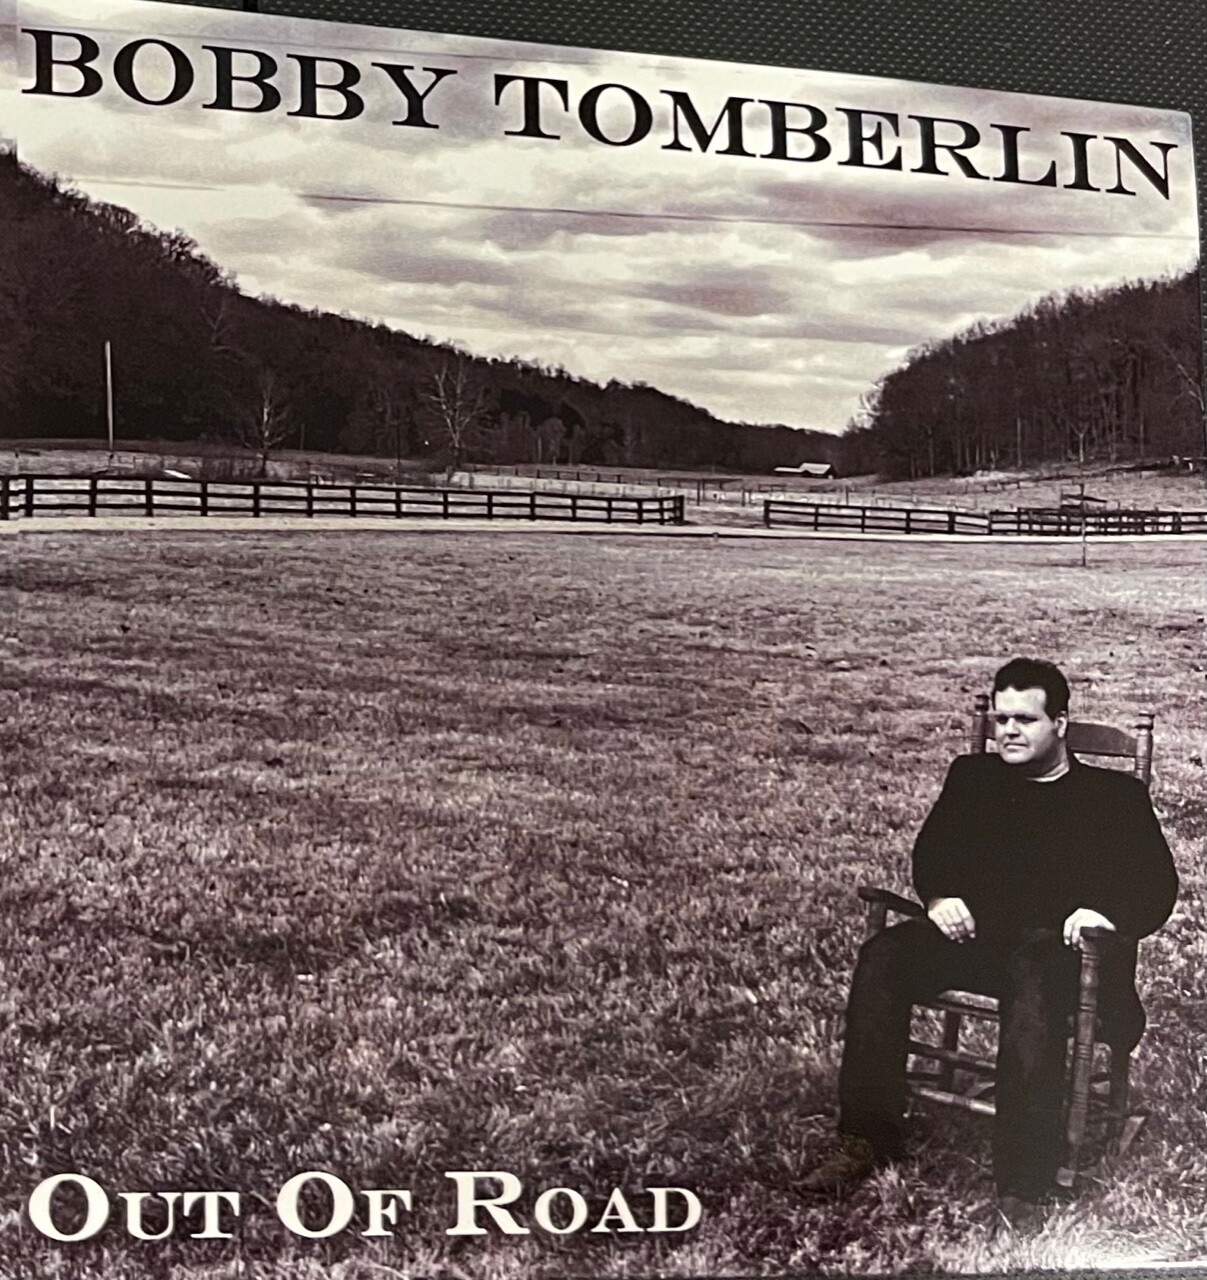 Music - CD - Bobby Tomberlin "Out of Road"